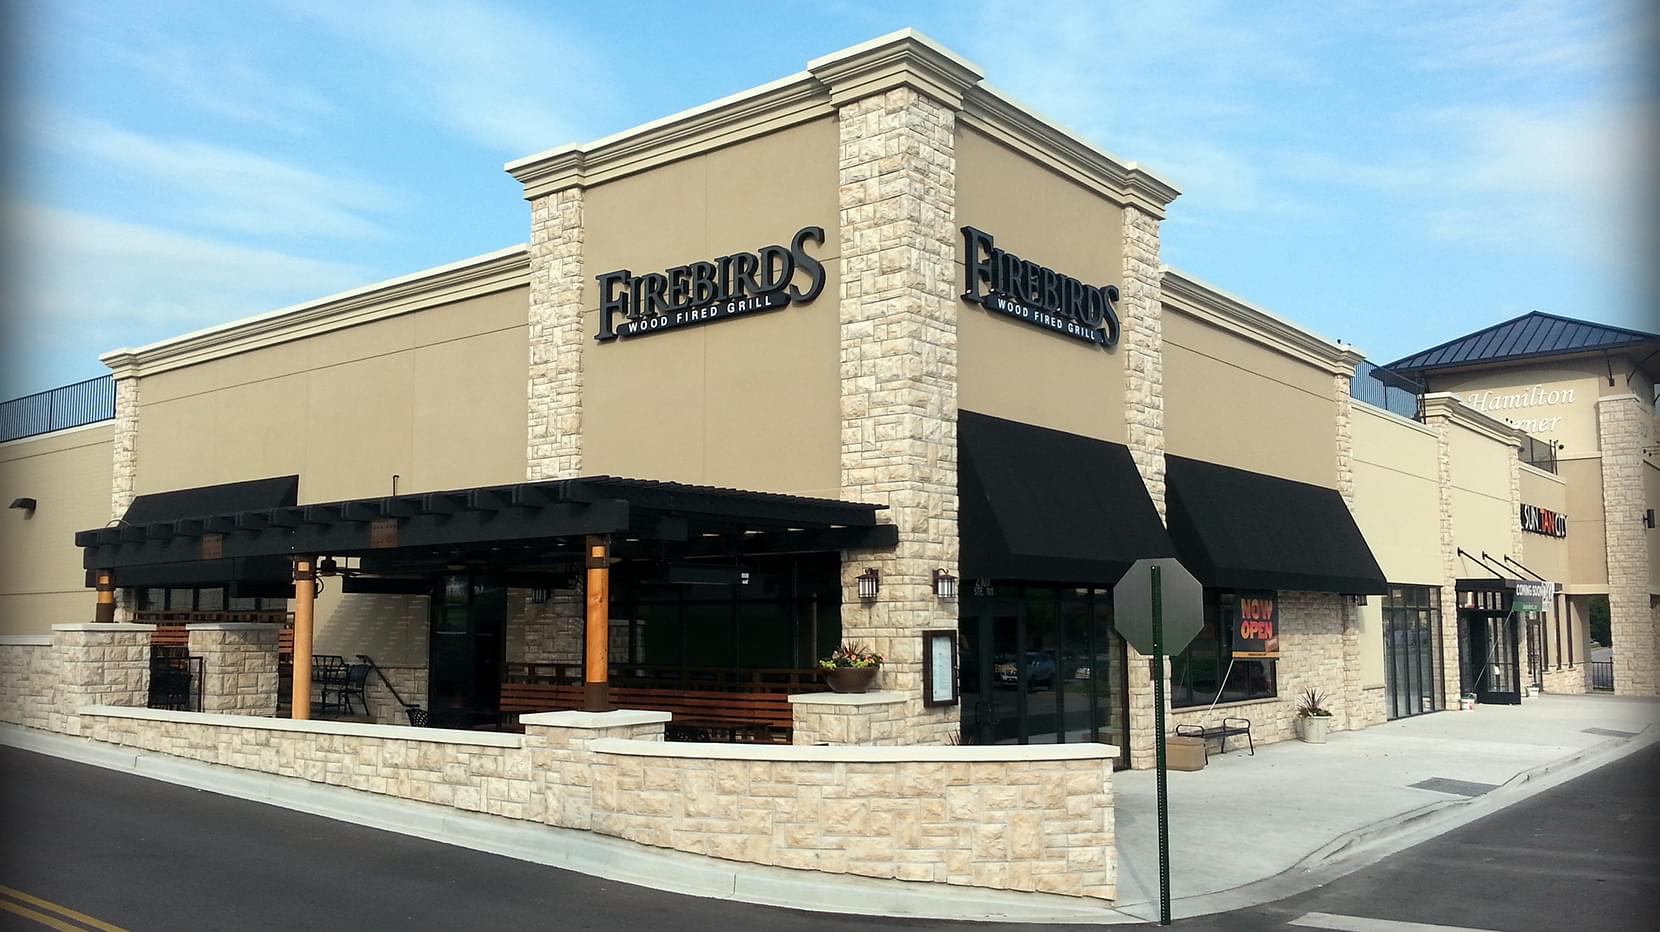 Exterior of the Firebirds Wood Fired Grill in Chattanooga, TN